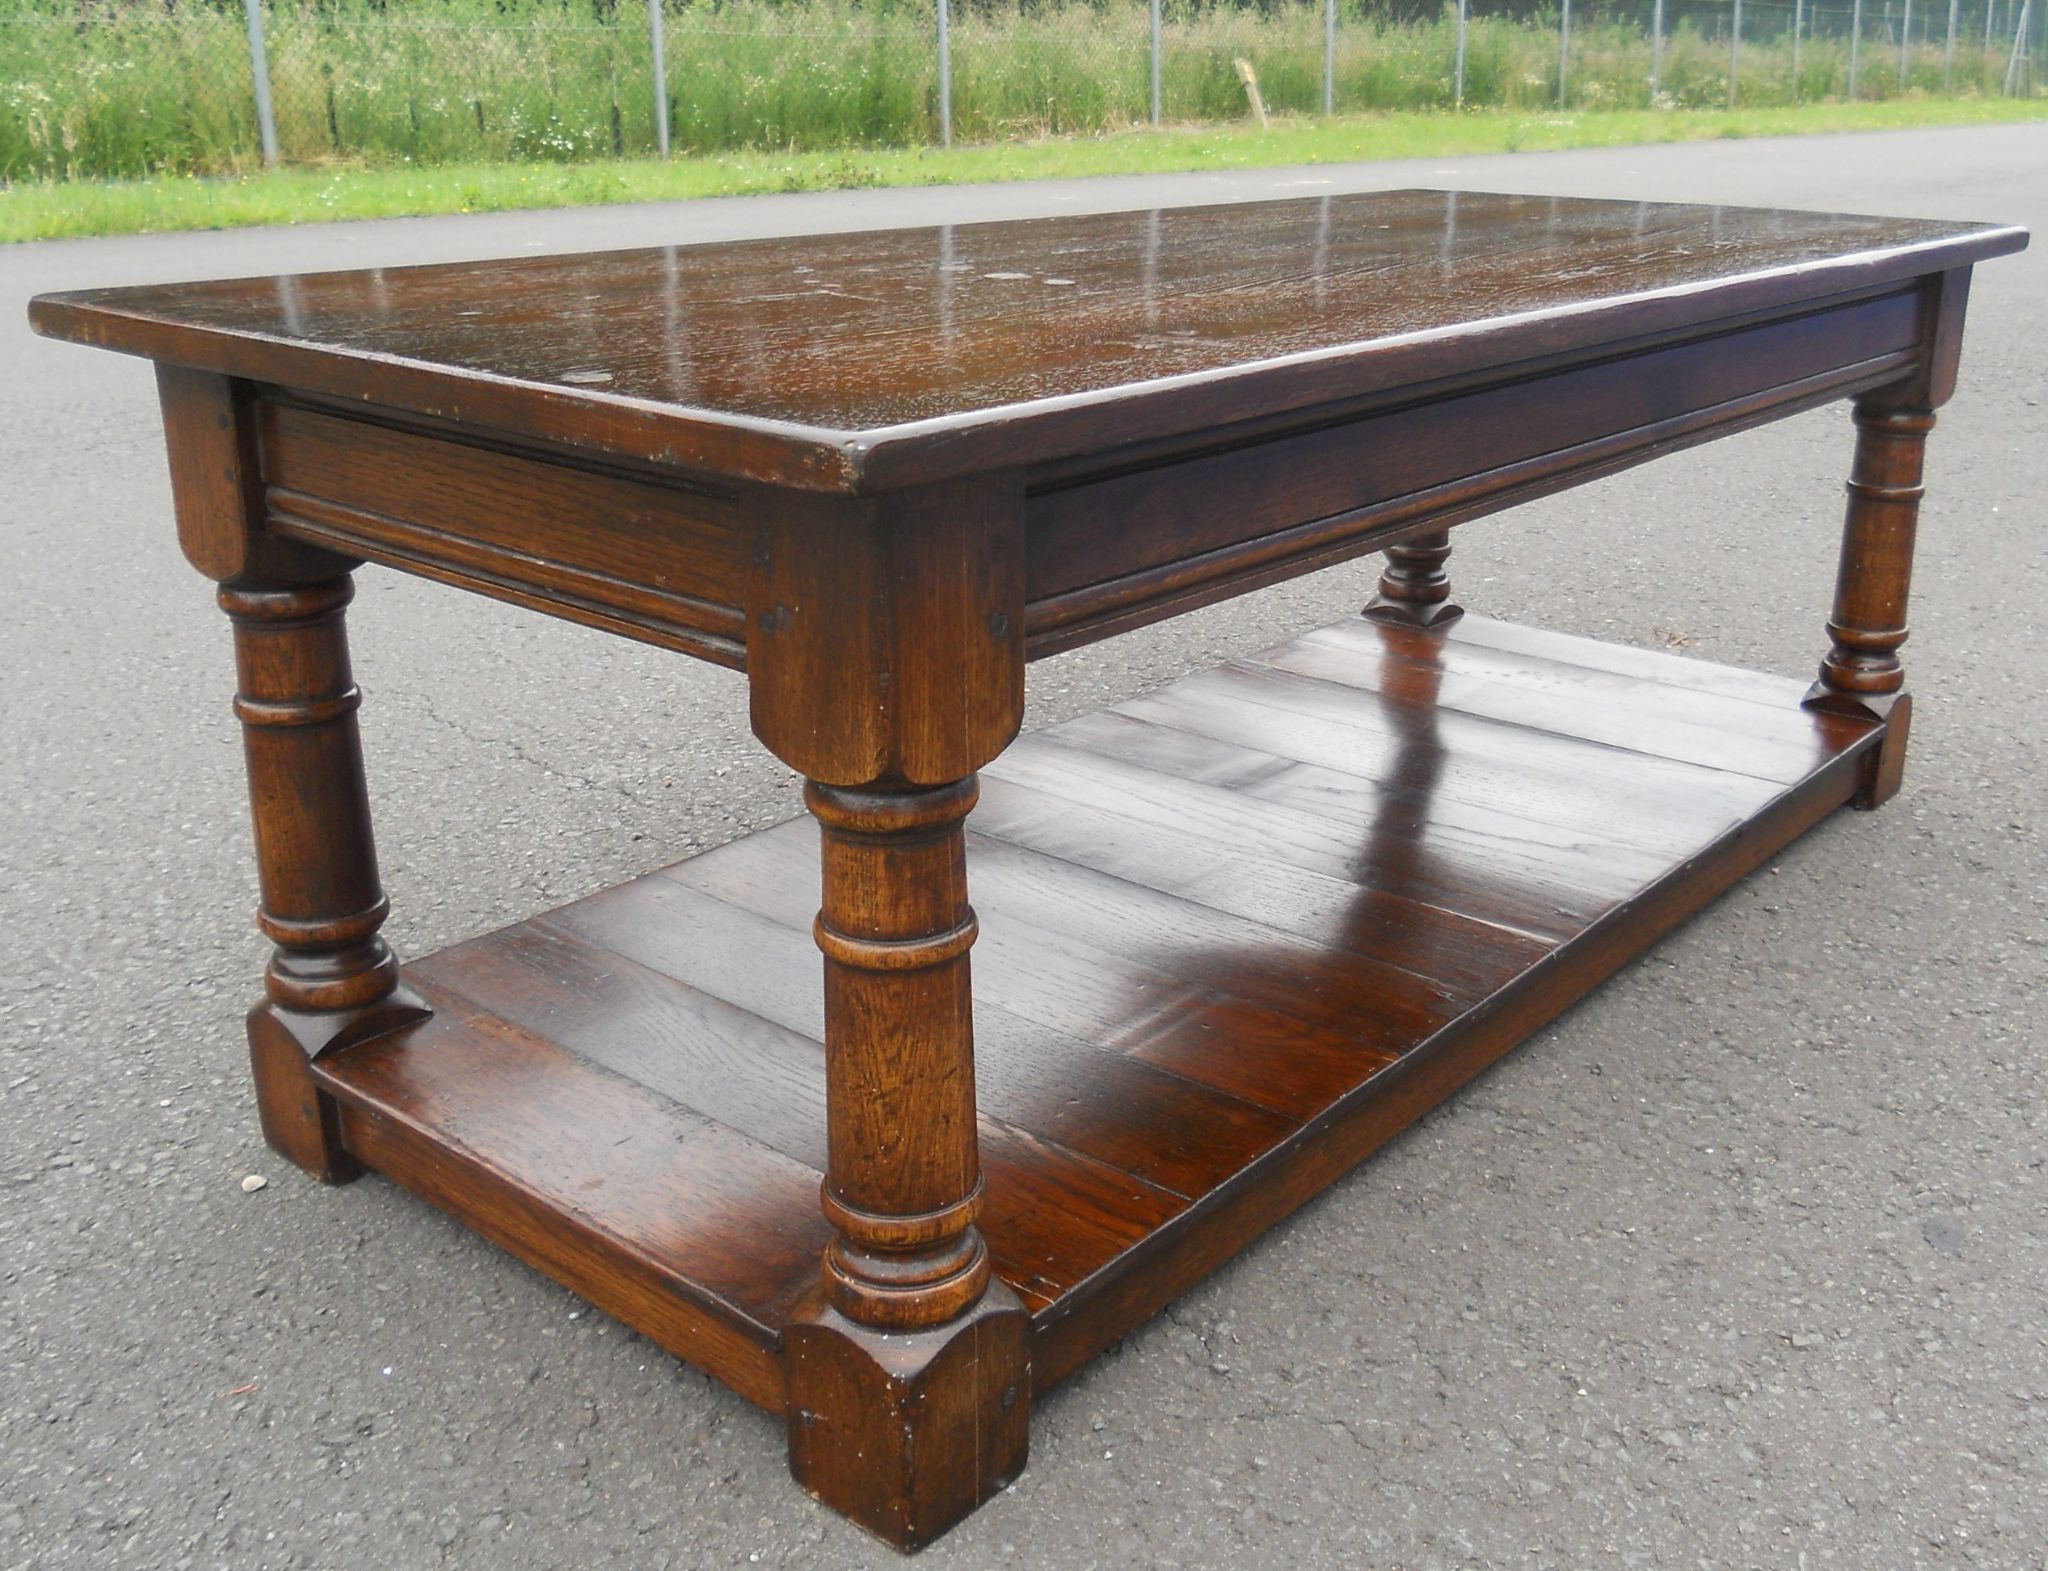 Widely Used Long Antique Style Oak Coffee Table With Antique White Black Coffee Tables (View 12 of 20)